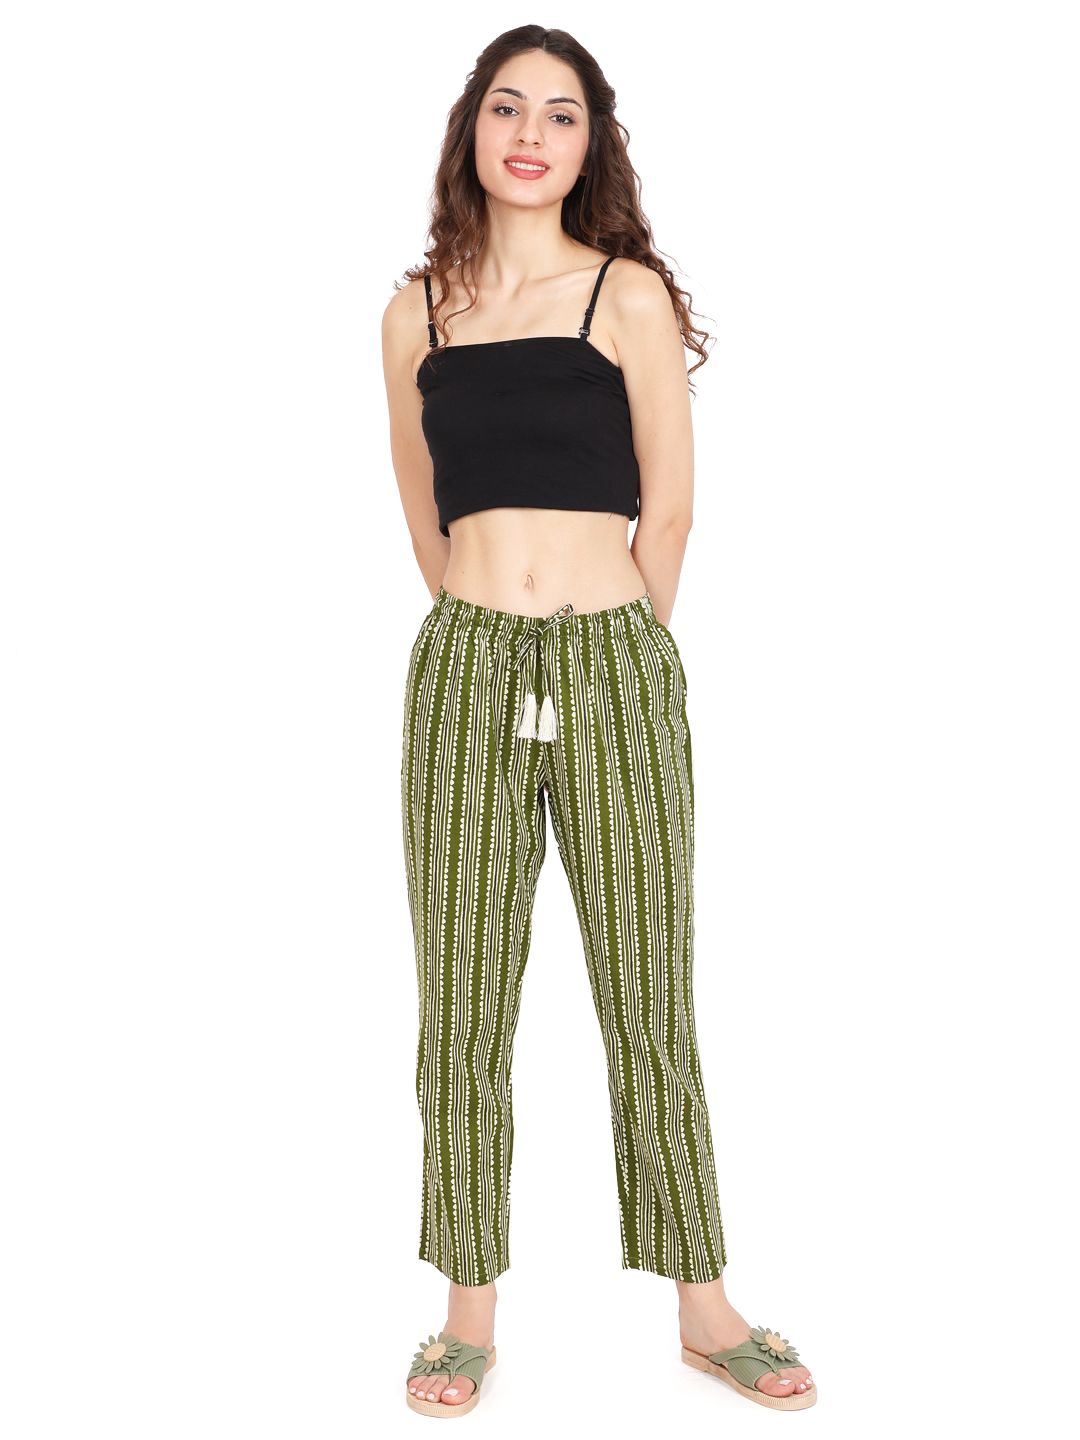 Evolove Women's Cotton Printed Pajama Relaxed Lounge Pants With Pockets ( Olive)